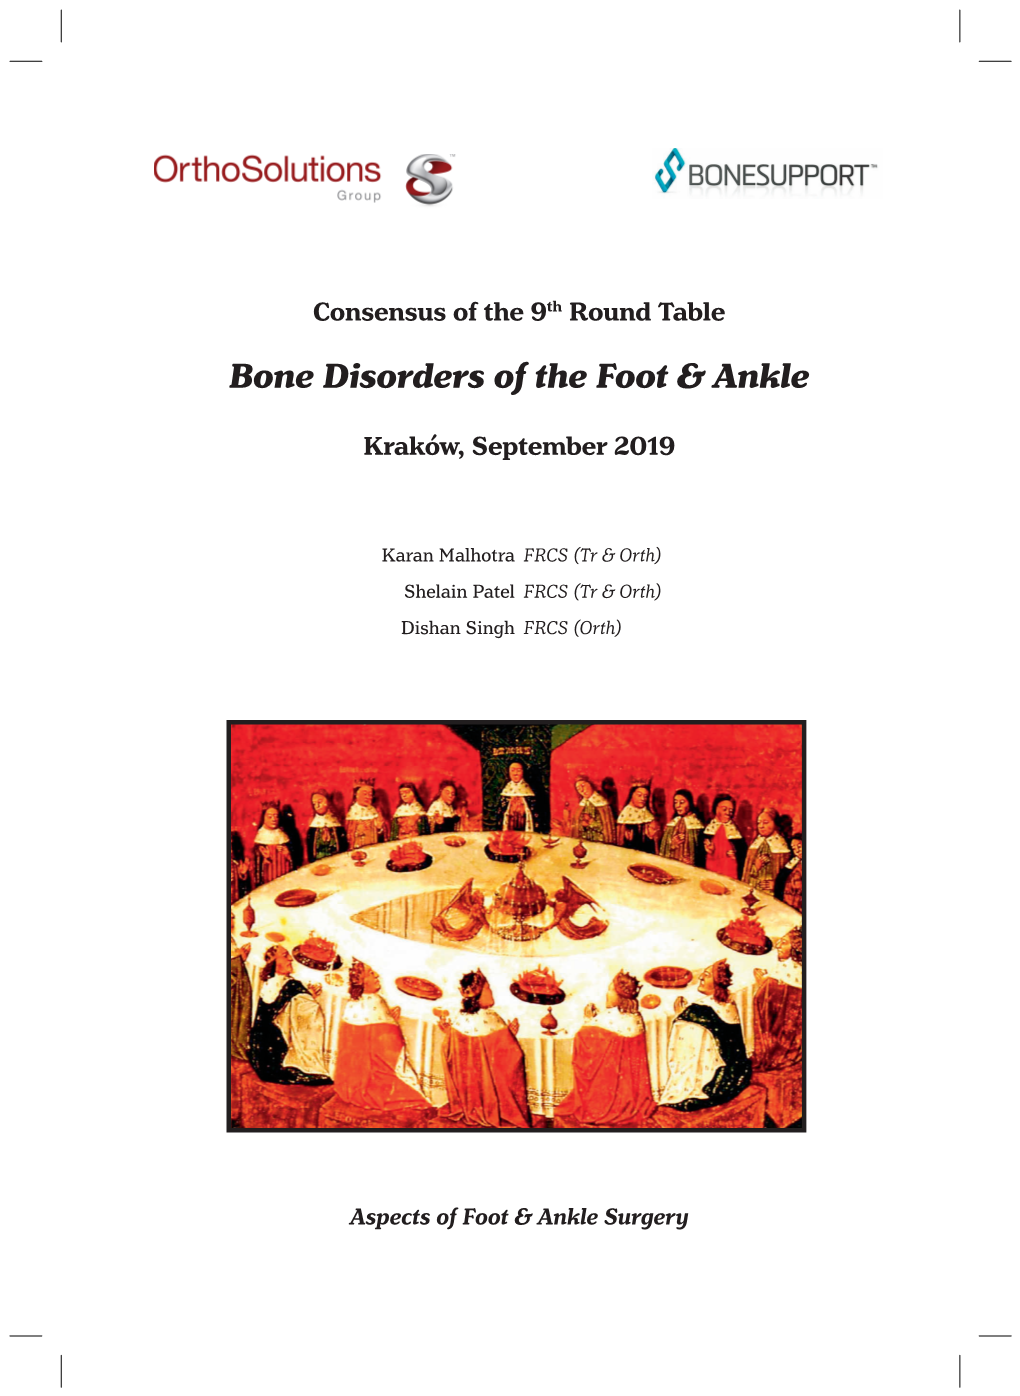 Bone Disorders of the Foot & Ankle